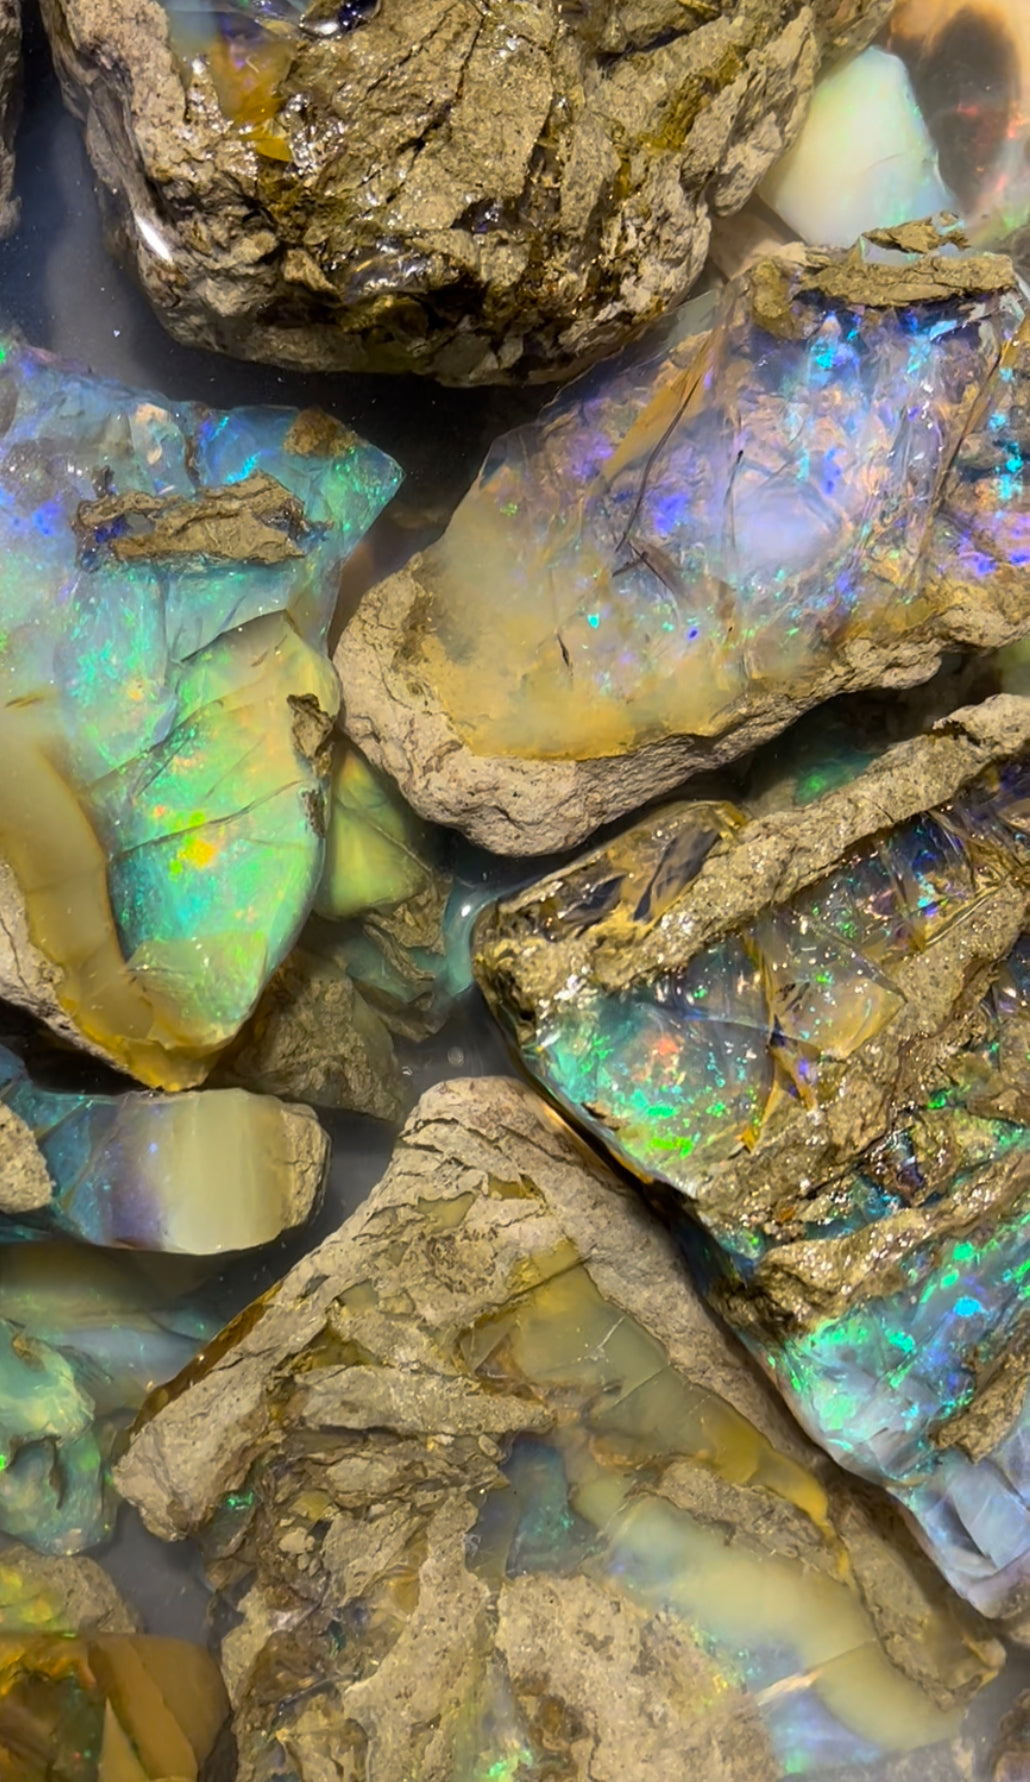 Negative effects of Opal: Does Opal bring Bad Luck?